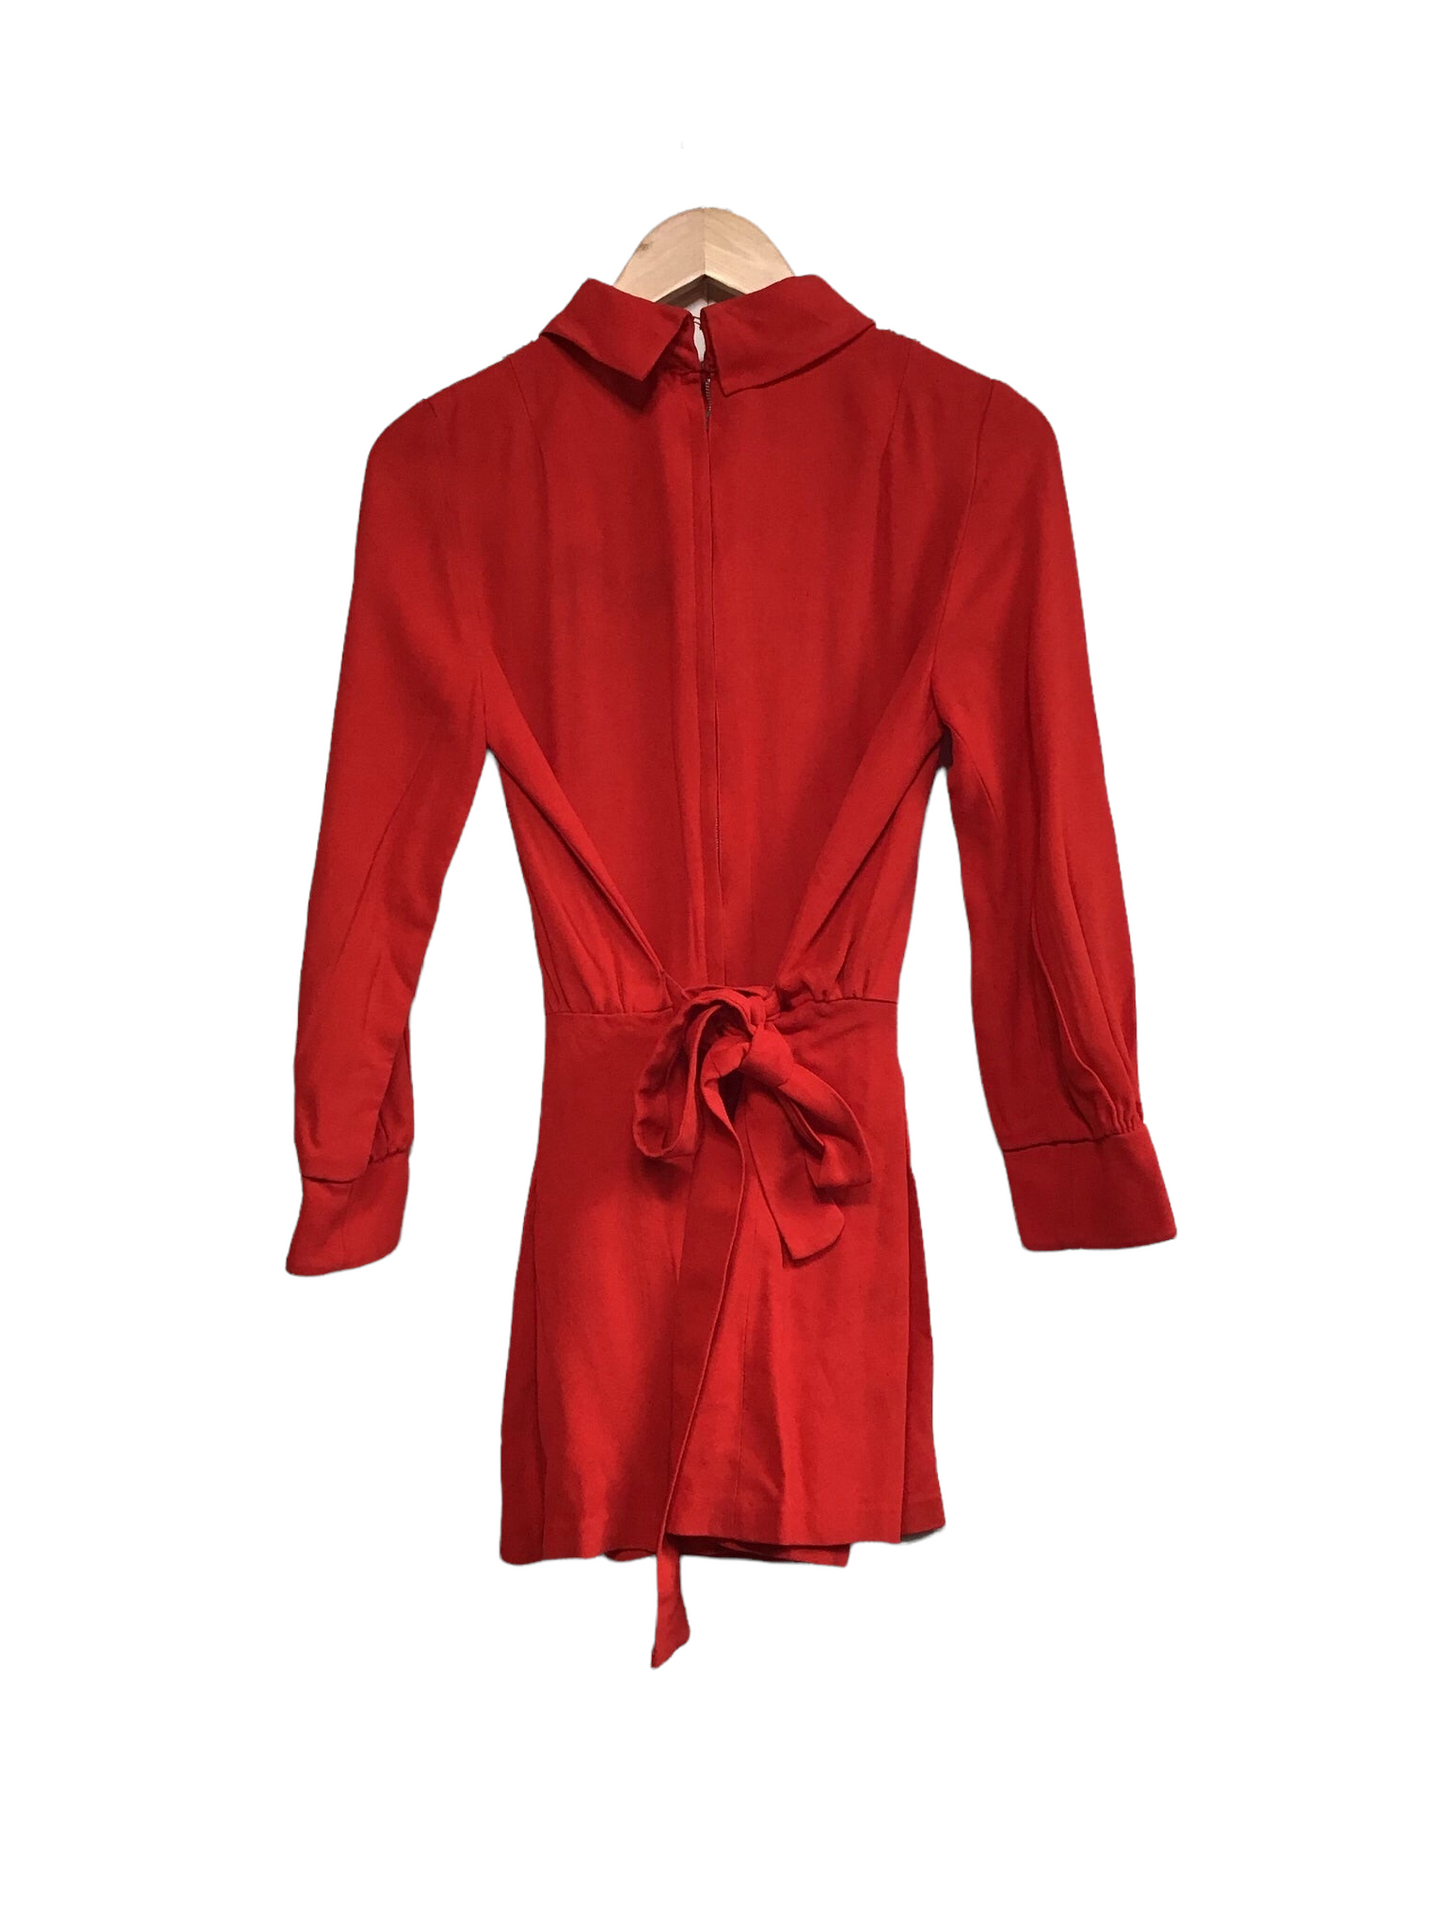 Shelana Red Playsuit (Size S)